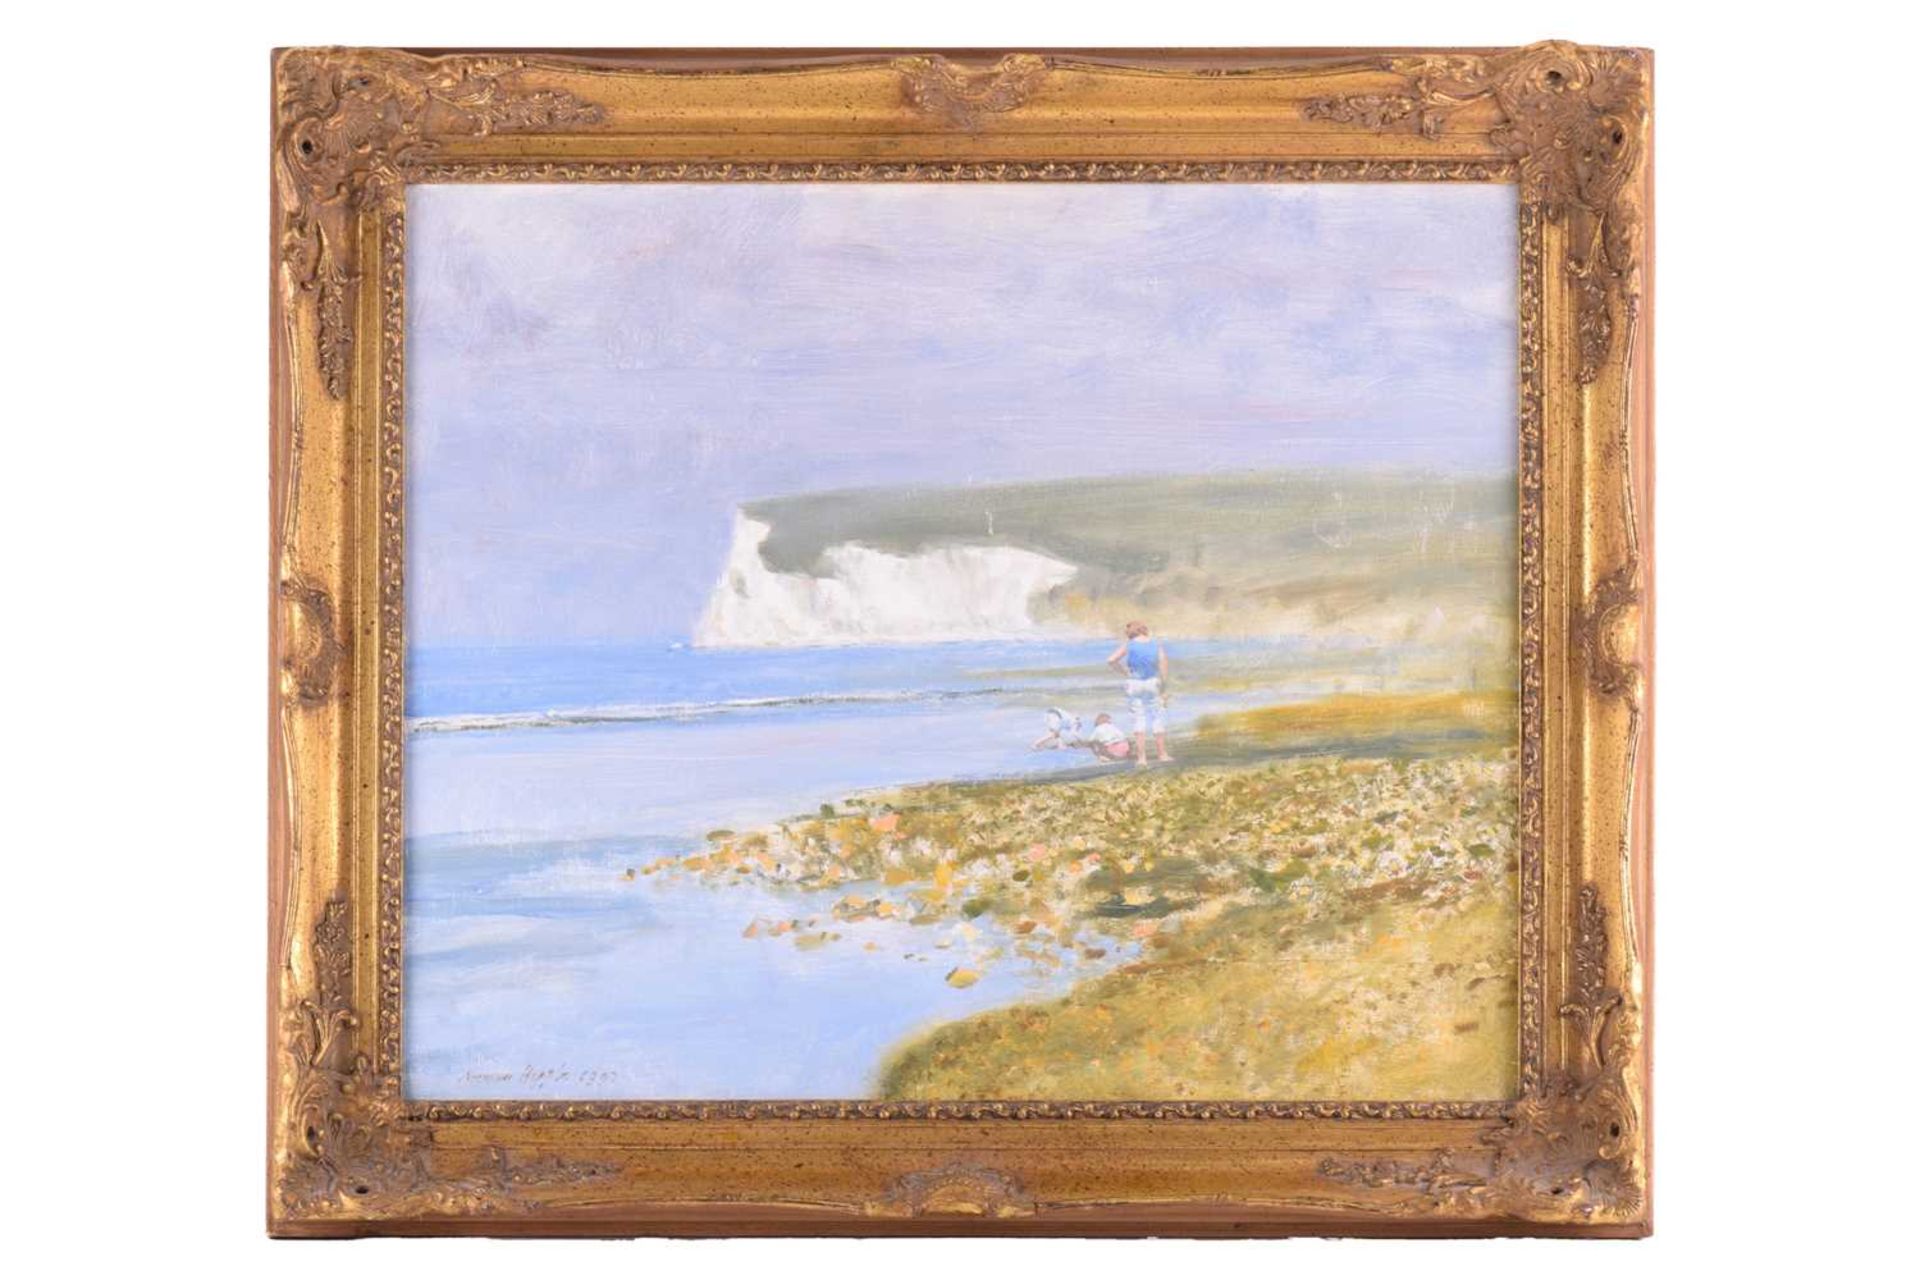 Norman R. Hepple (1908 - 1994), 'Beachtime Fun', signed and dated 1993, oil on board, 50 x 60 cm, fr